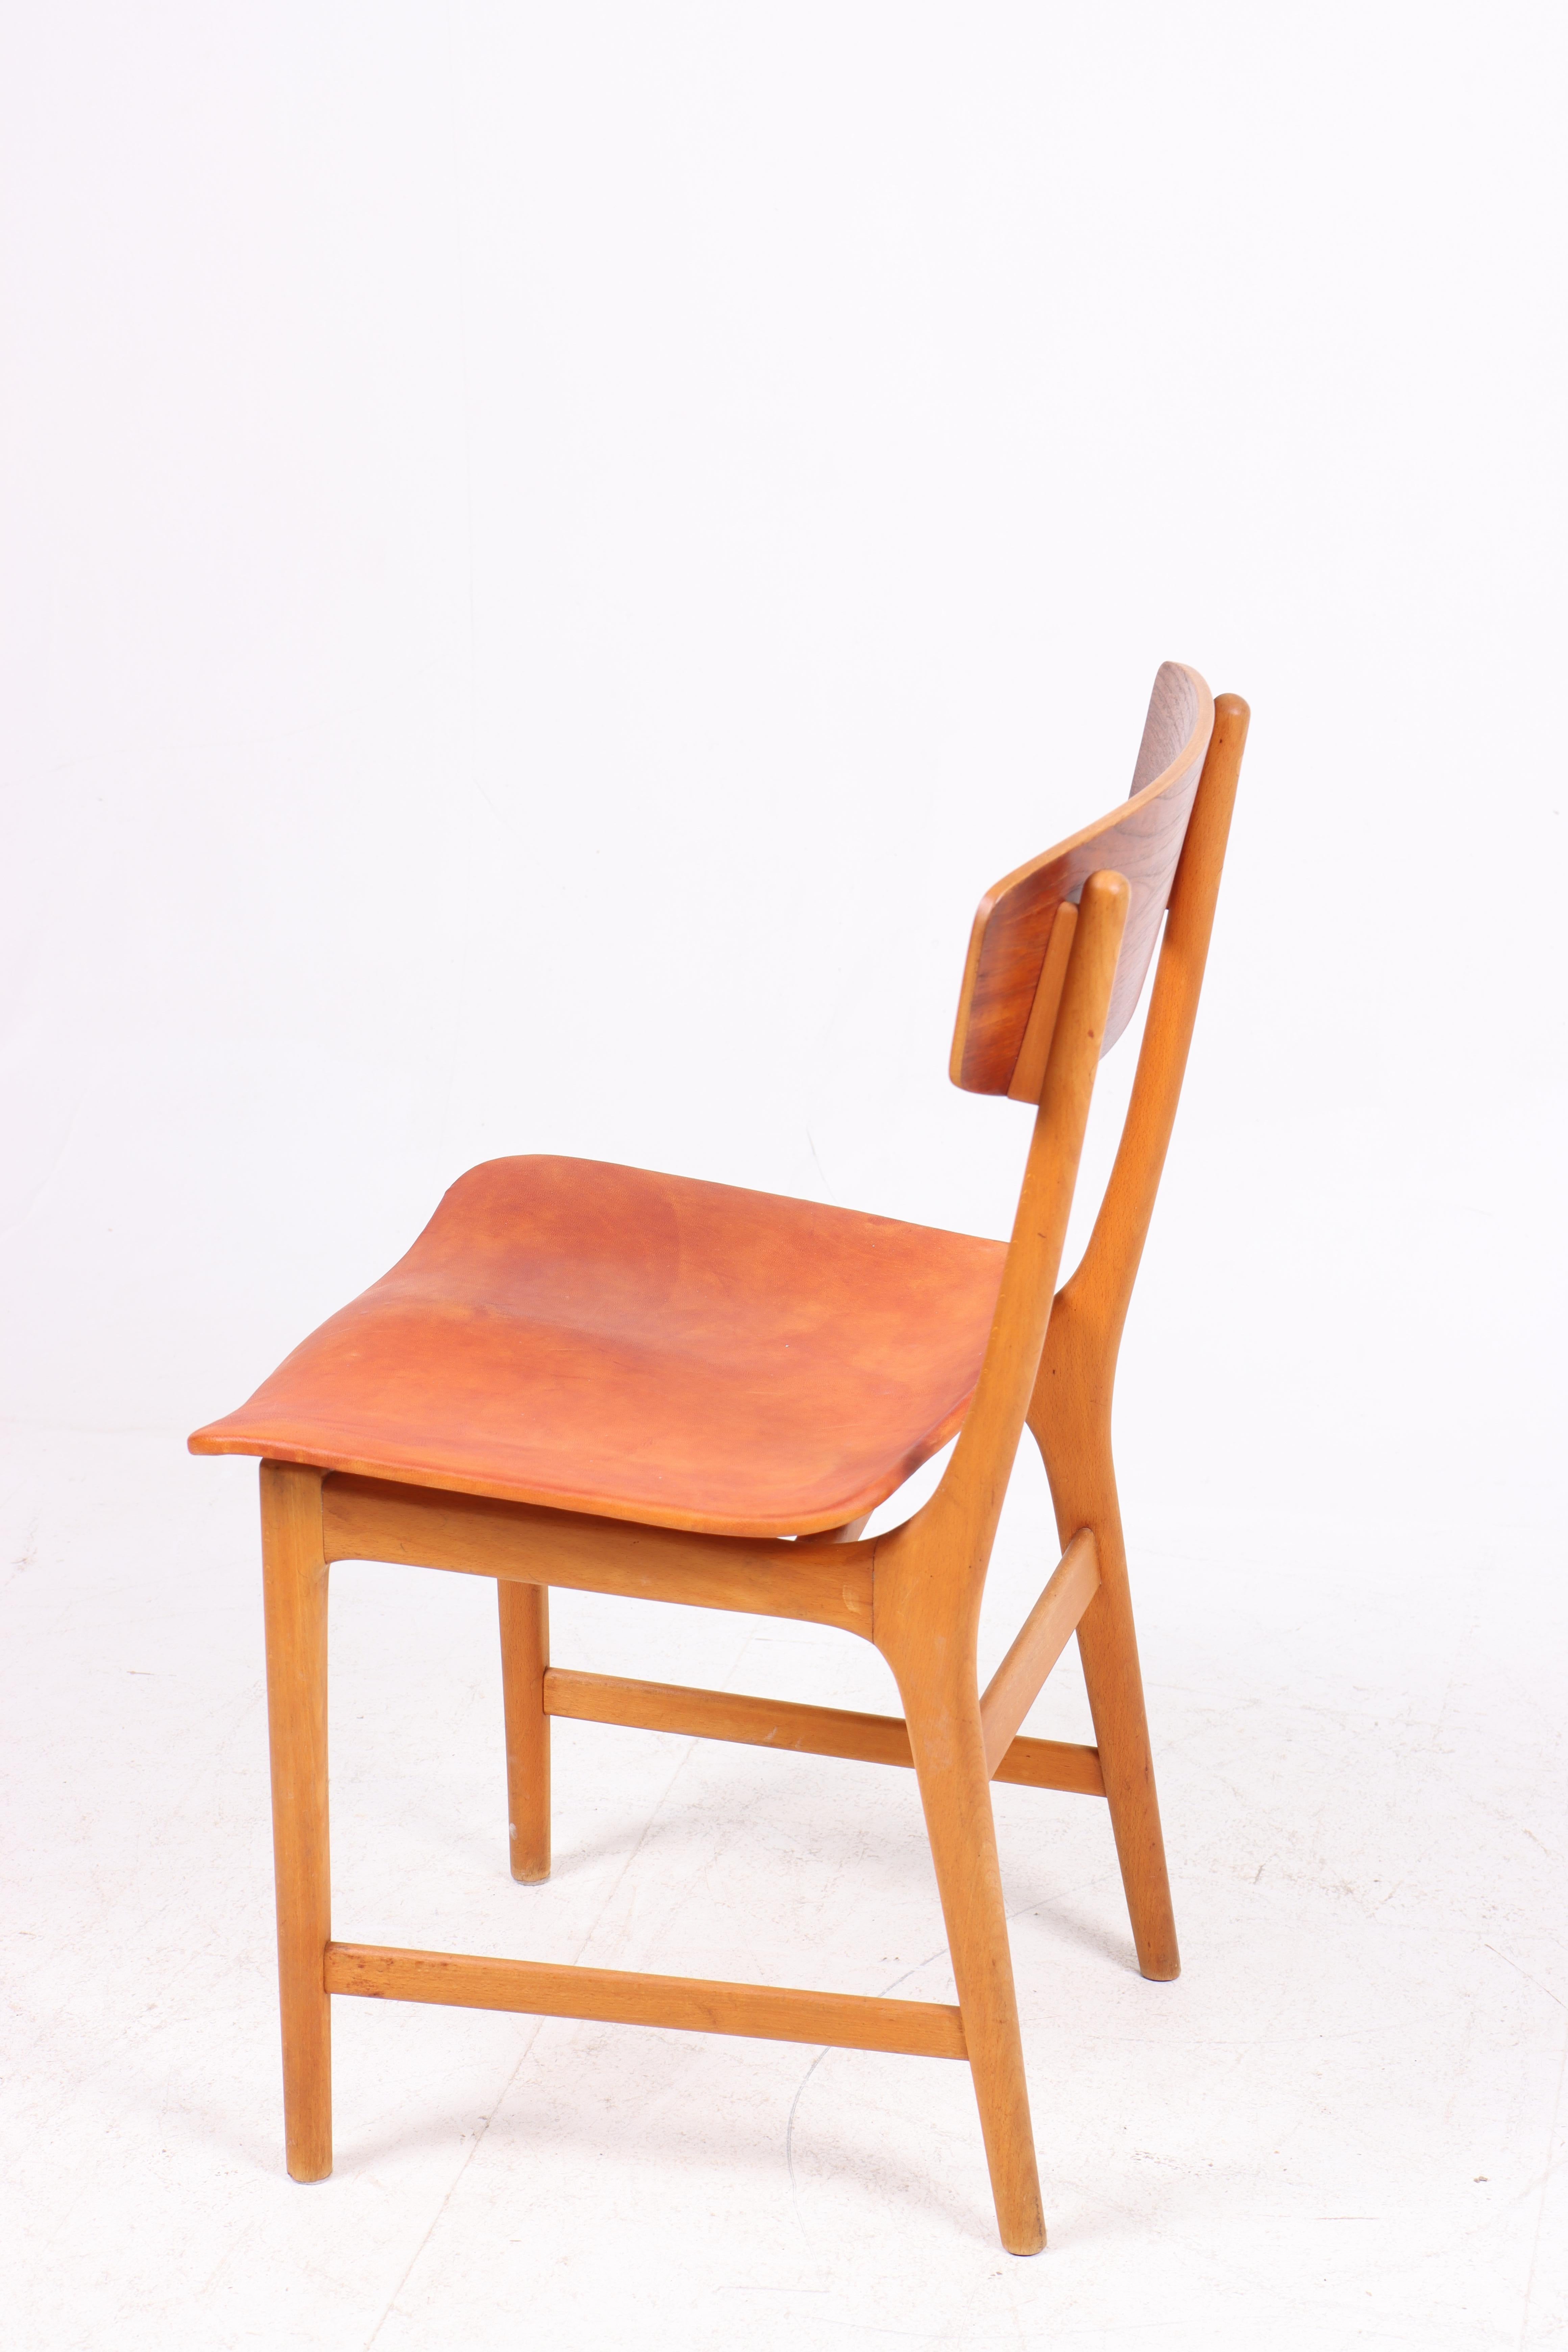 Set of Four Side Chairs in Teak and Leather, Danish Design, 1960s For Sale 3